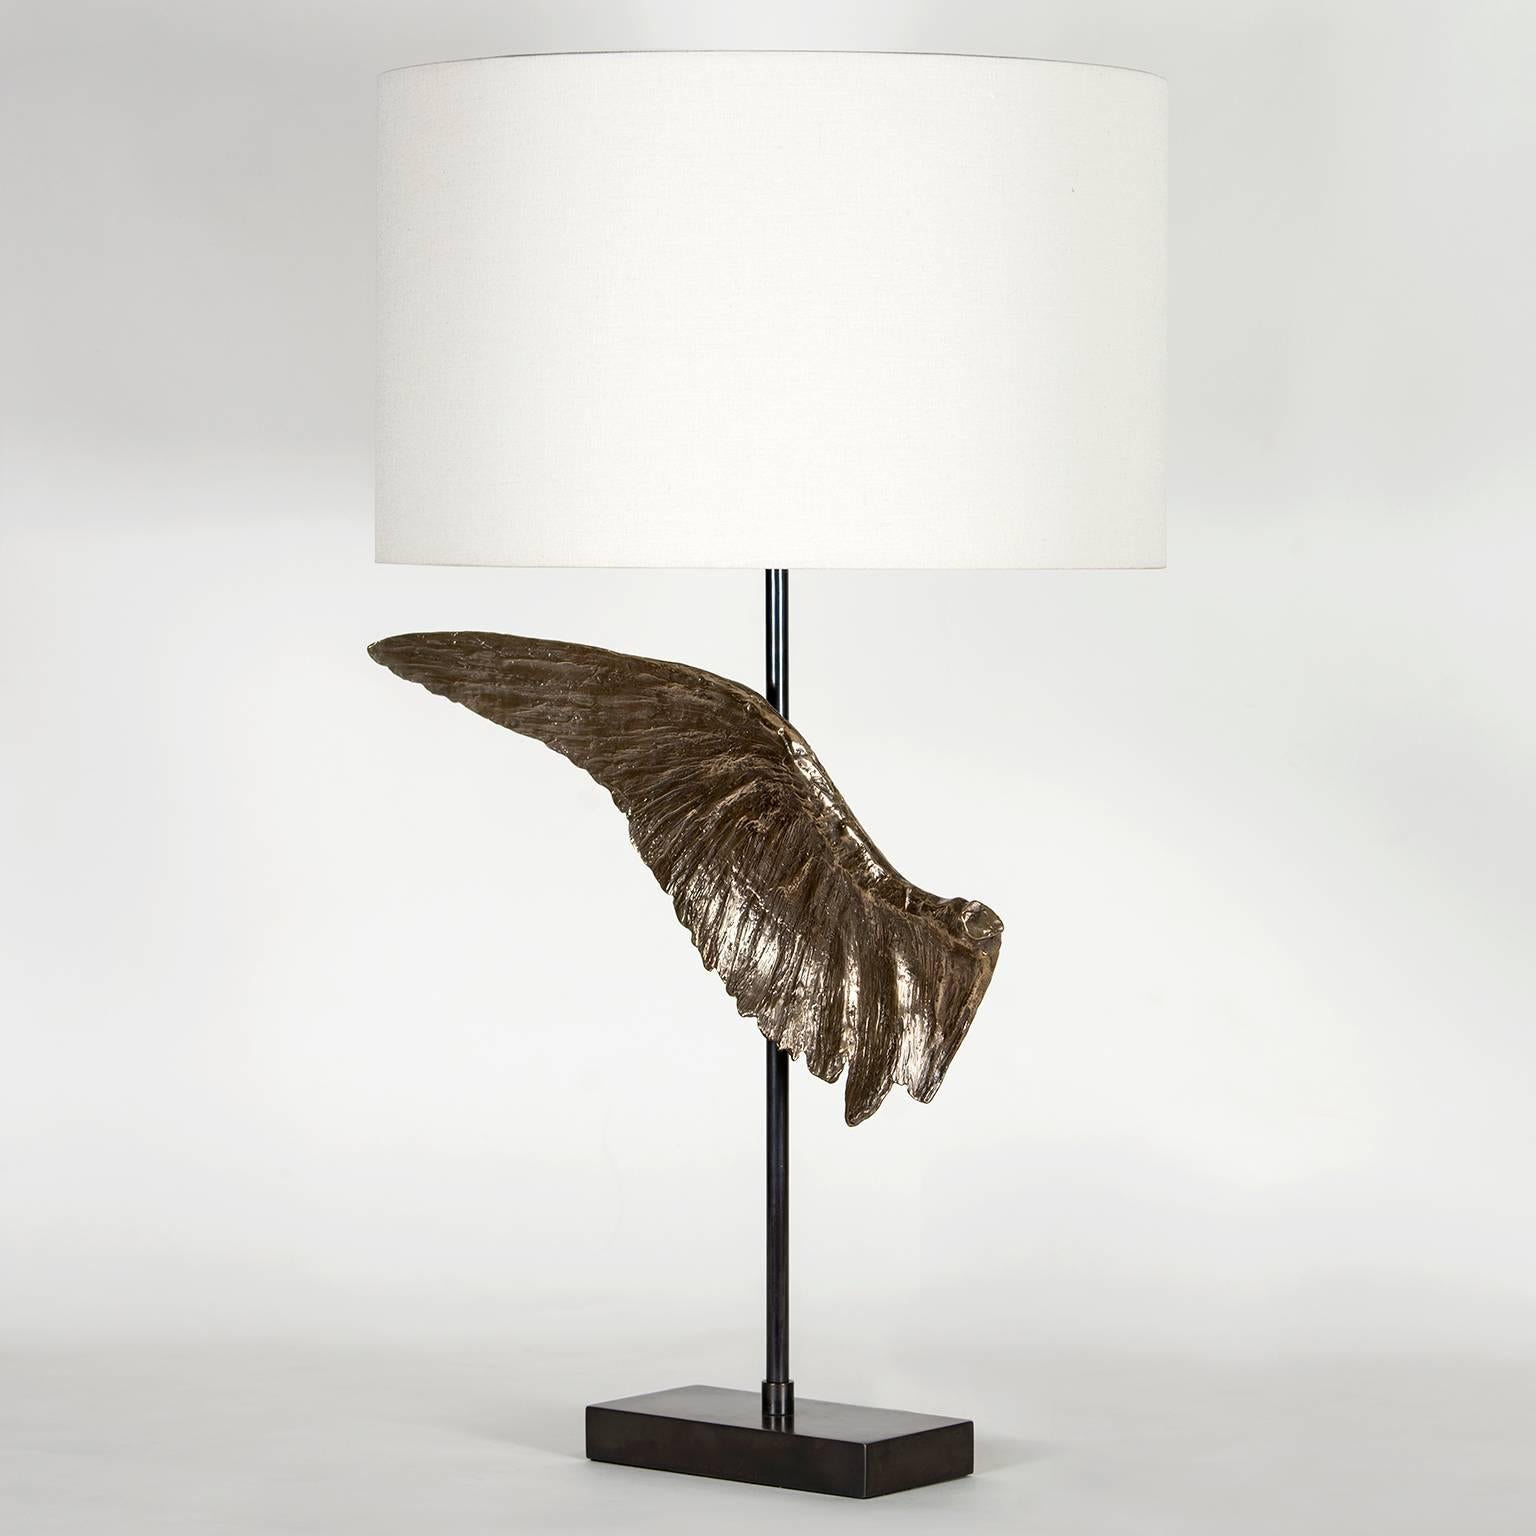 The Voltaire table lamp consists of a cast bronze wing sculpture inspired by the past and present using age old and modern techniques to create each piece. There is a left and right wing available and each has its unique details and slight